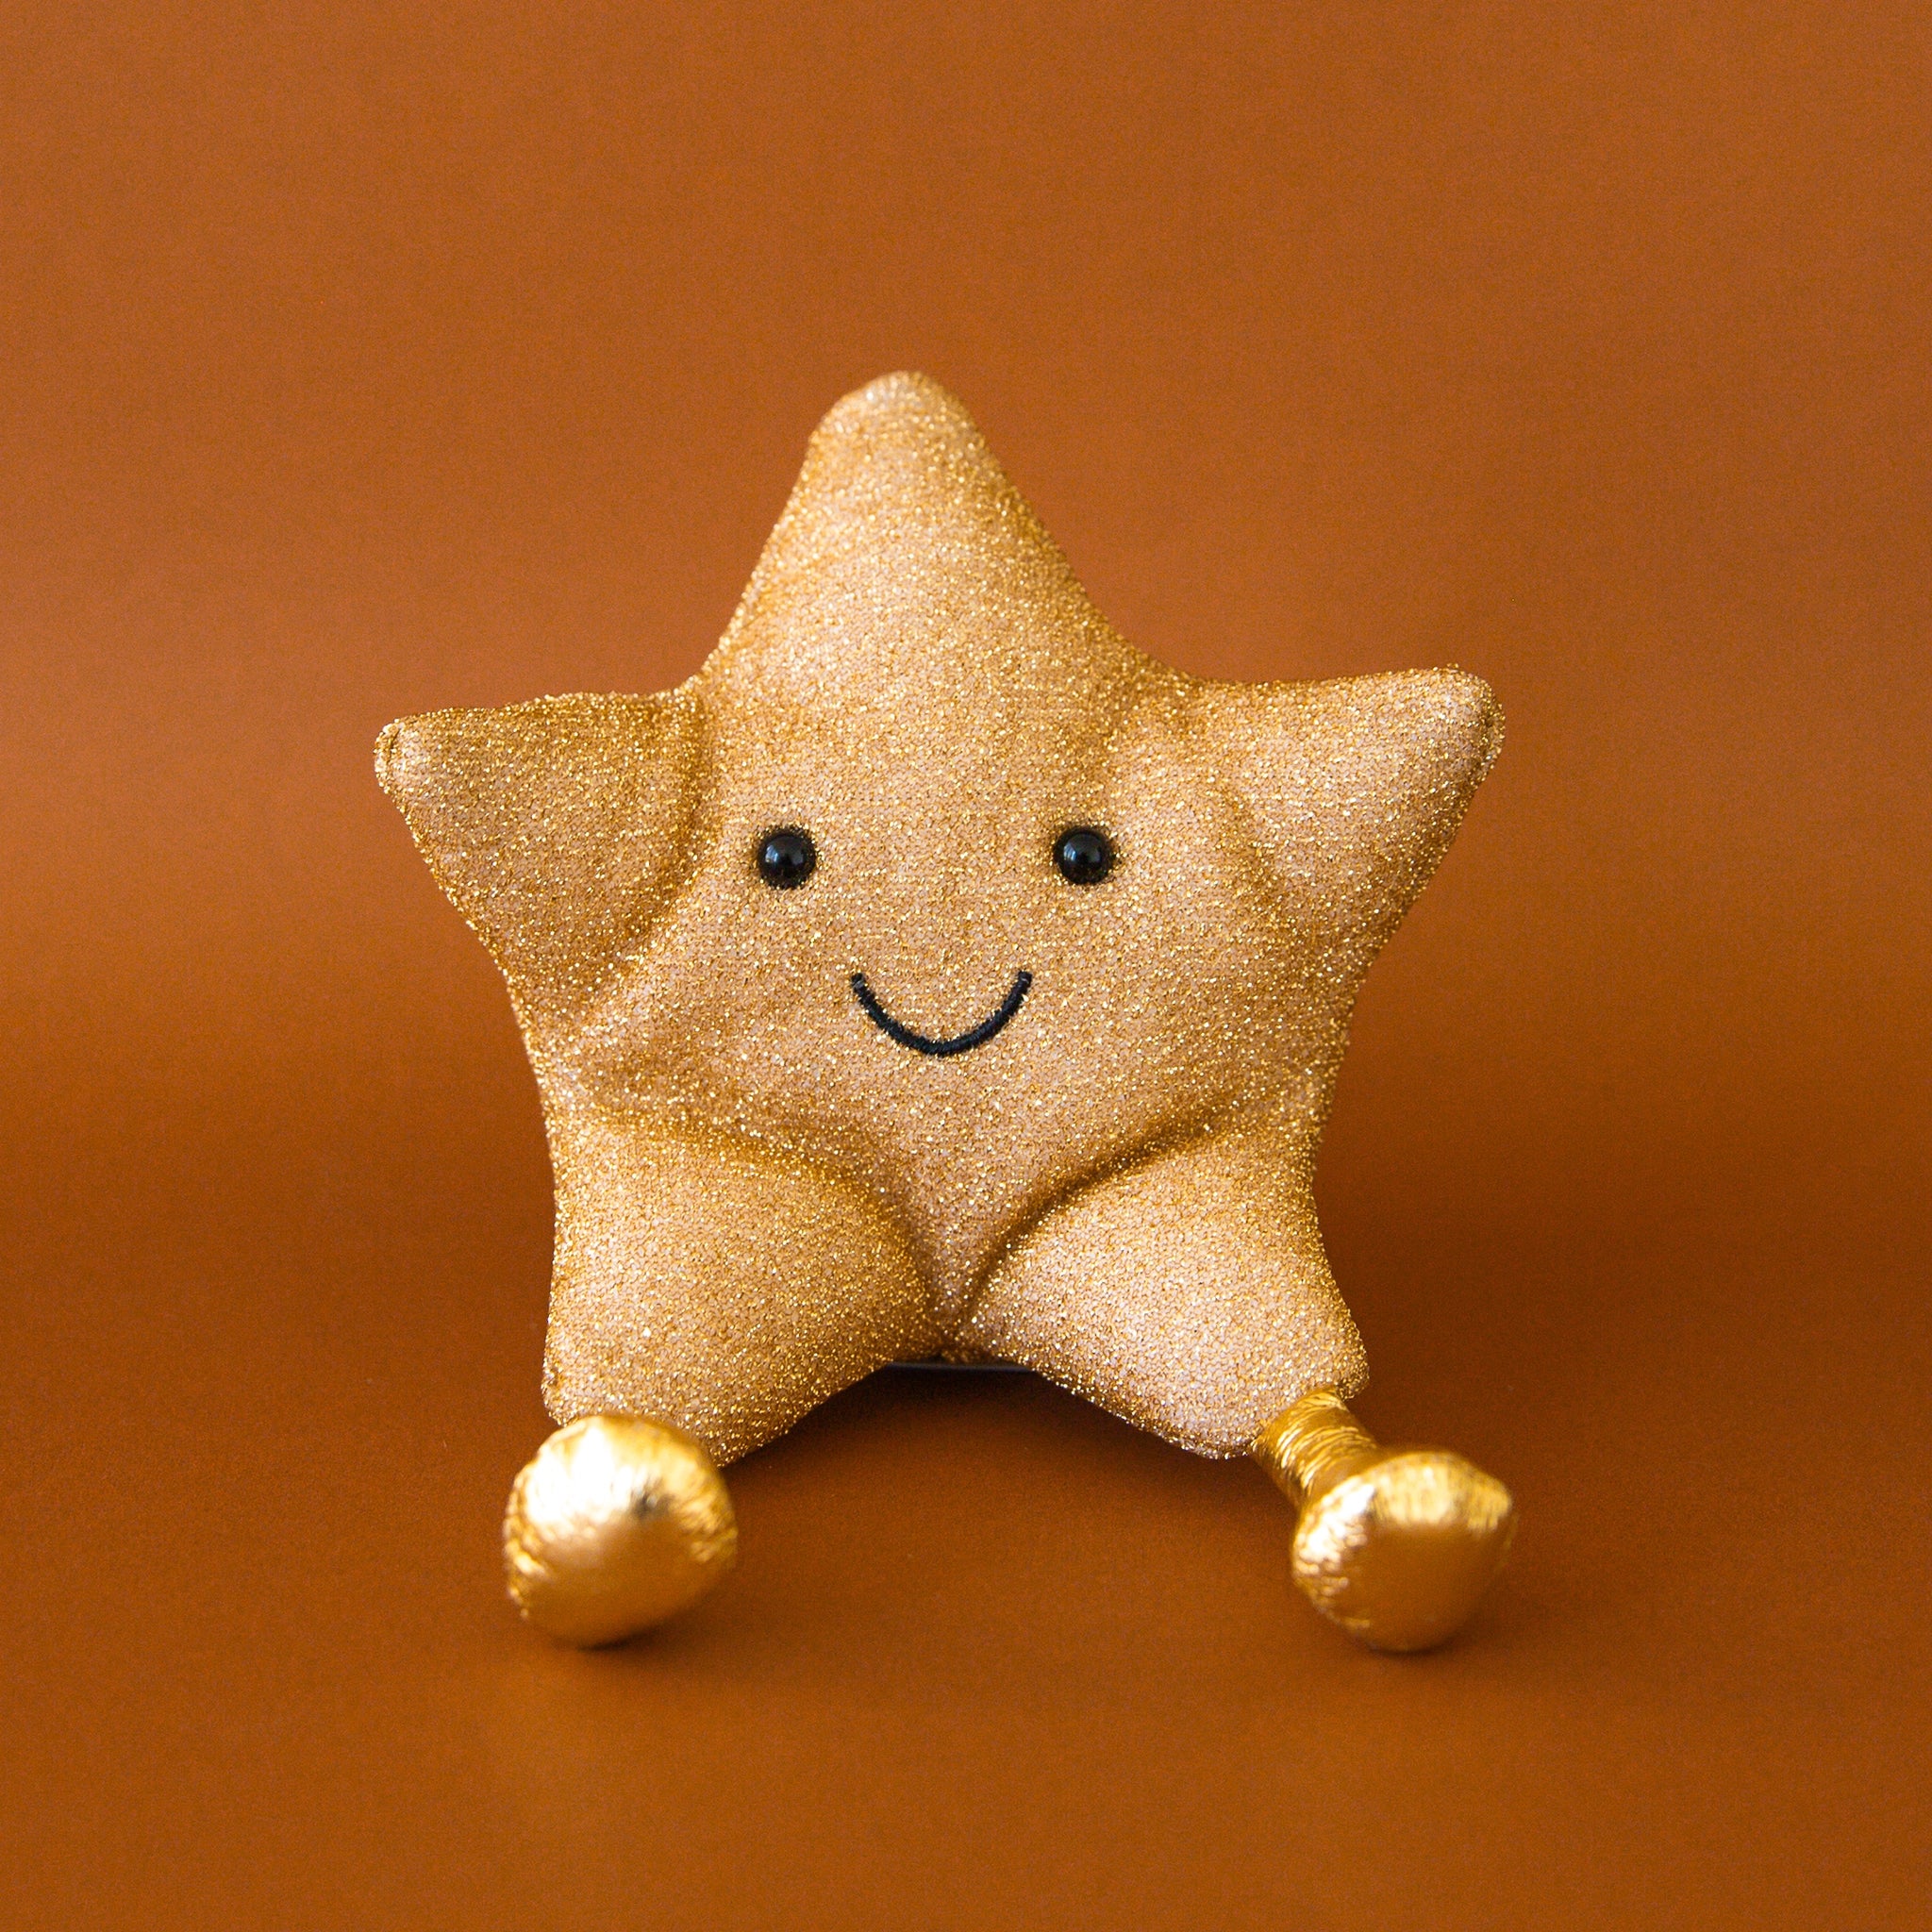 On a burnt orange background is a gold star stuffed toy with a smiling face and gold legs. 